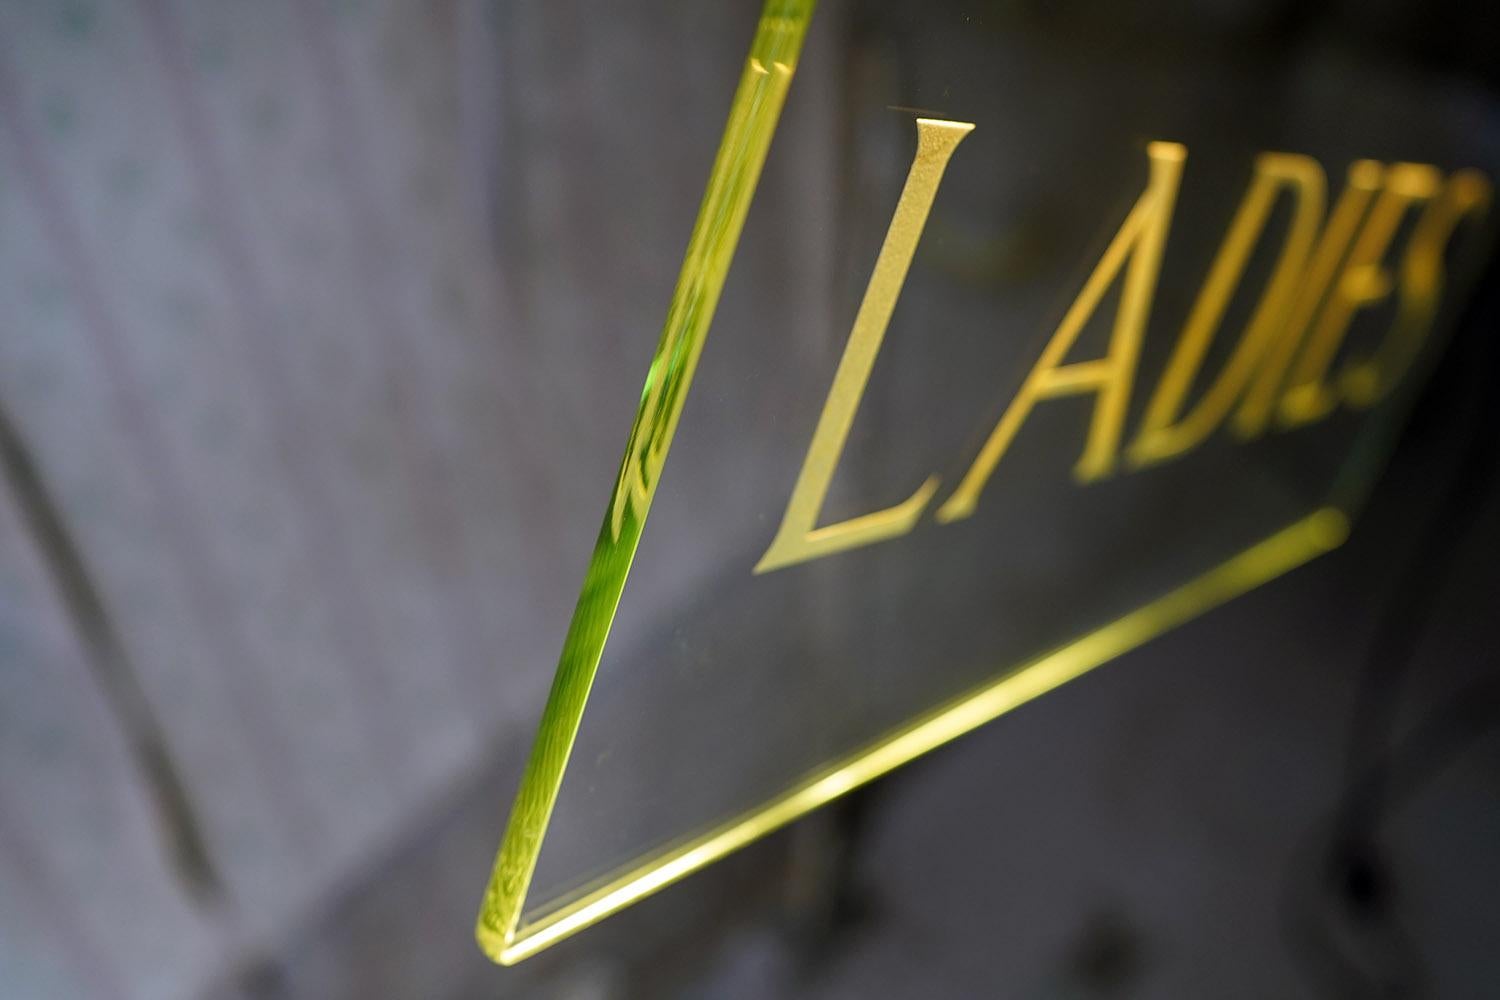 The very stylish Art Deco period illuminated display sign, designed by Internalite London, and constructed of metal & glass with acid etched lettering for Ladies, the whole in superb condition surviving from a cinema or theatre foyer and from the